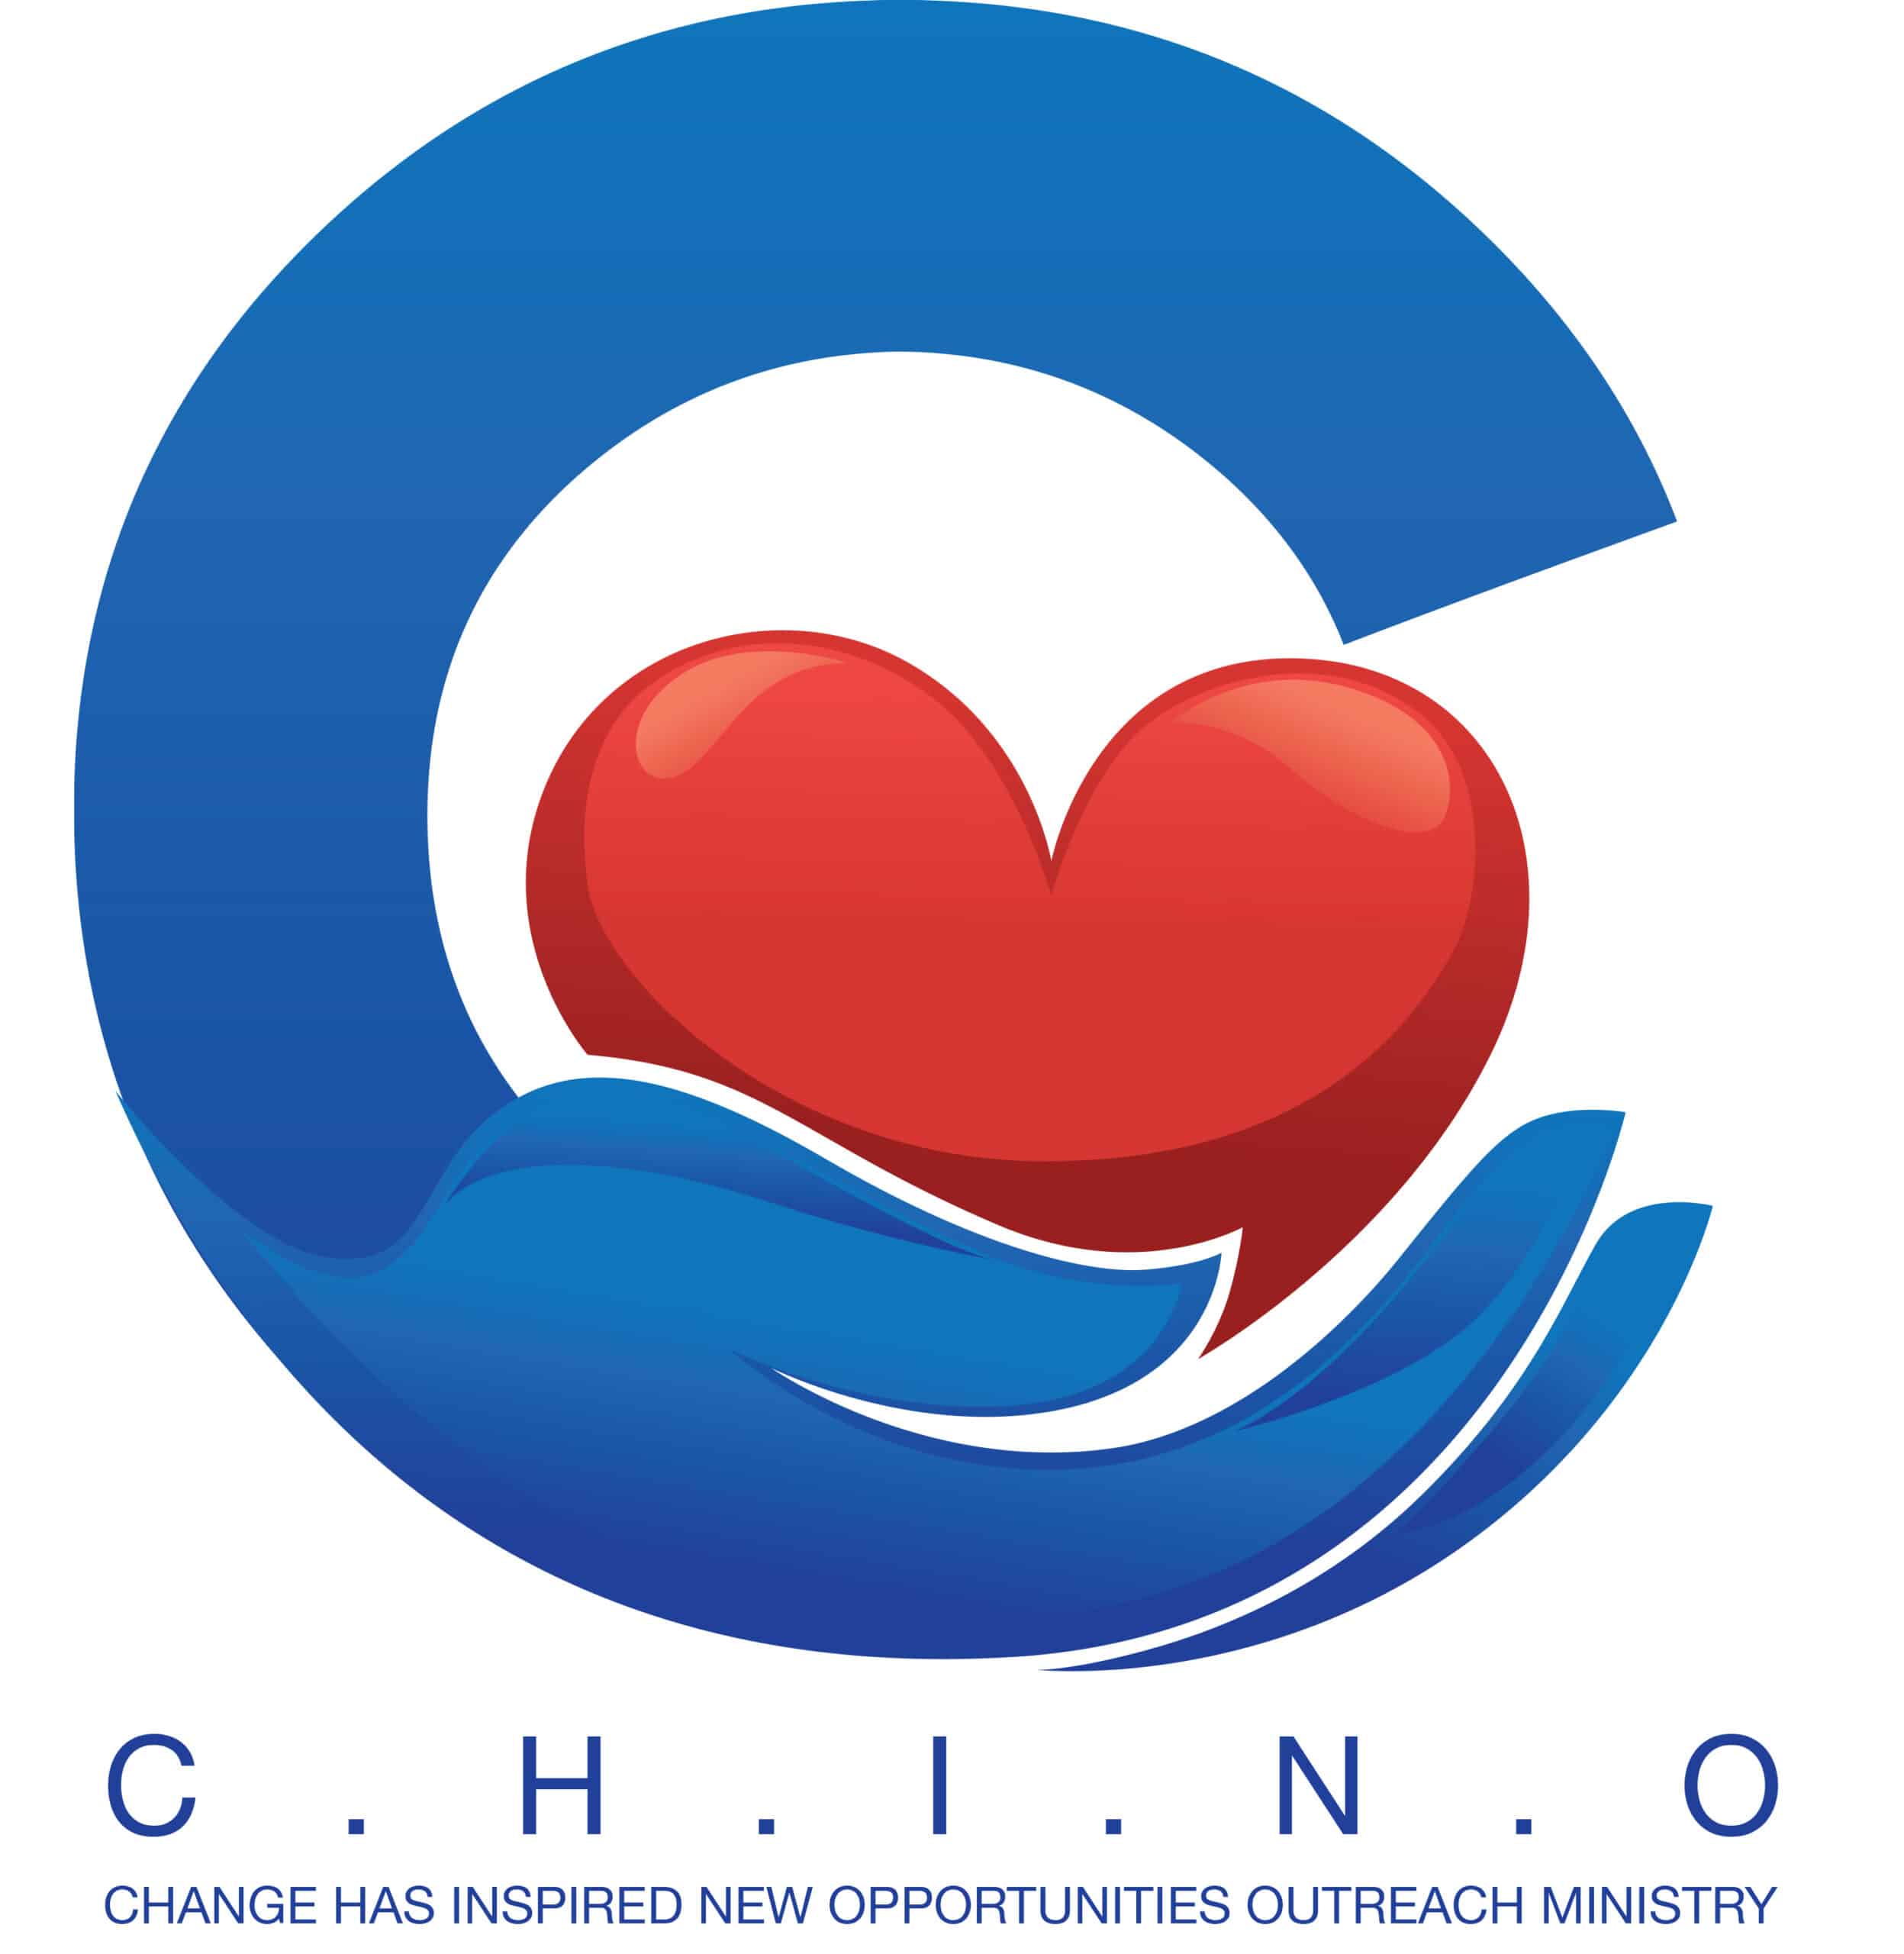 C.H.I.N.O- Change Has Inspired New Opportunities